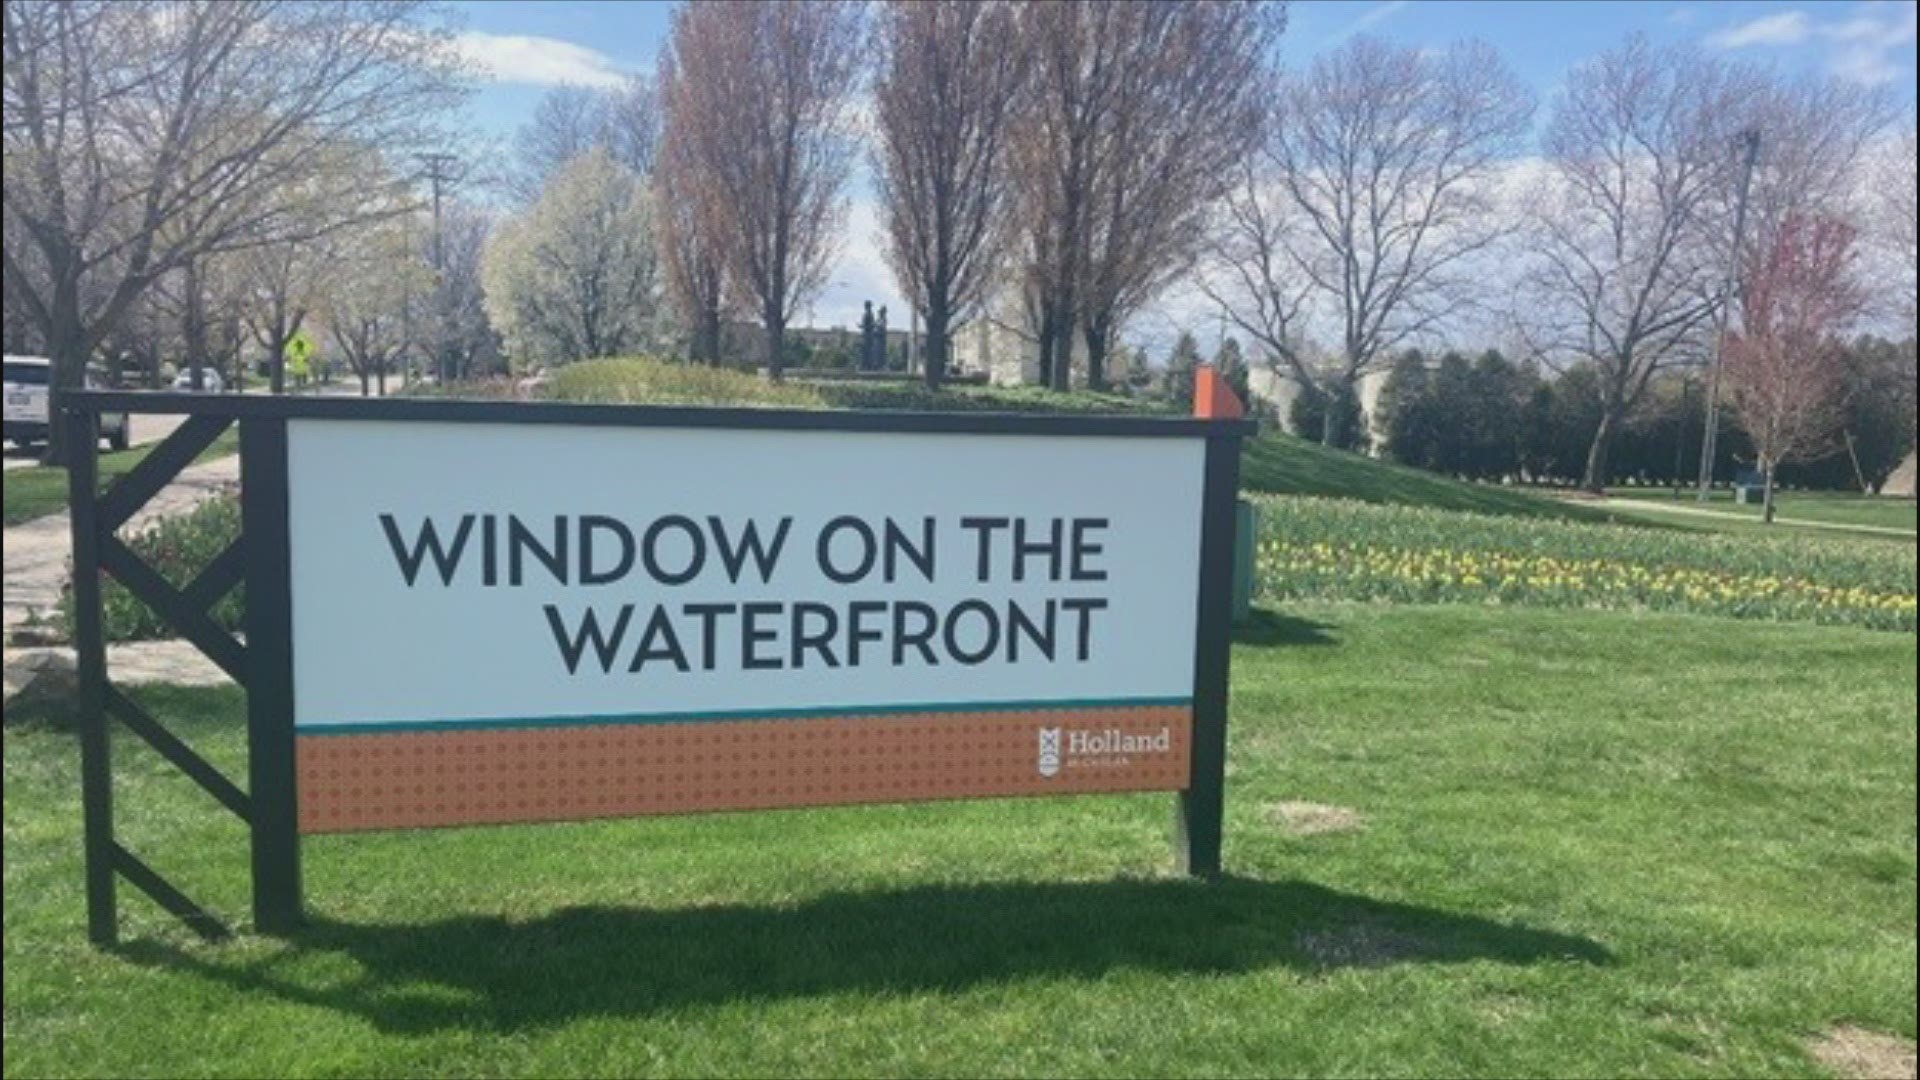 A one-acre area will be added to Window on the Waterfront Park to include playground equipment, walking paths and an amphitheater and pavilion.